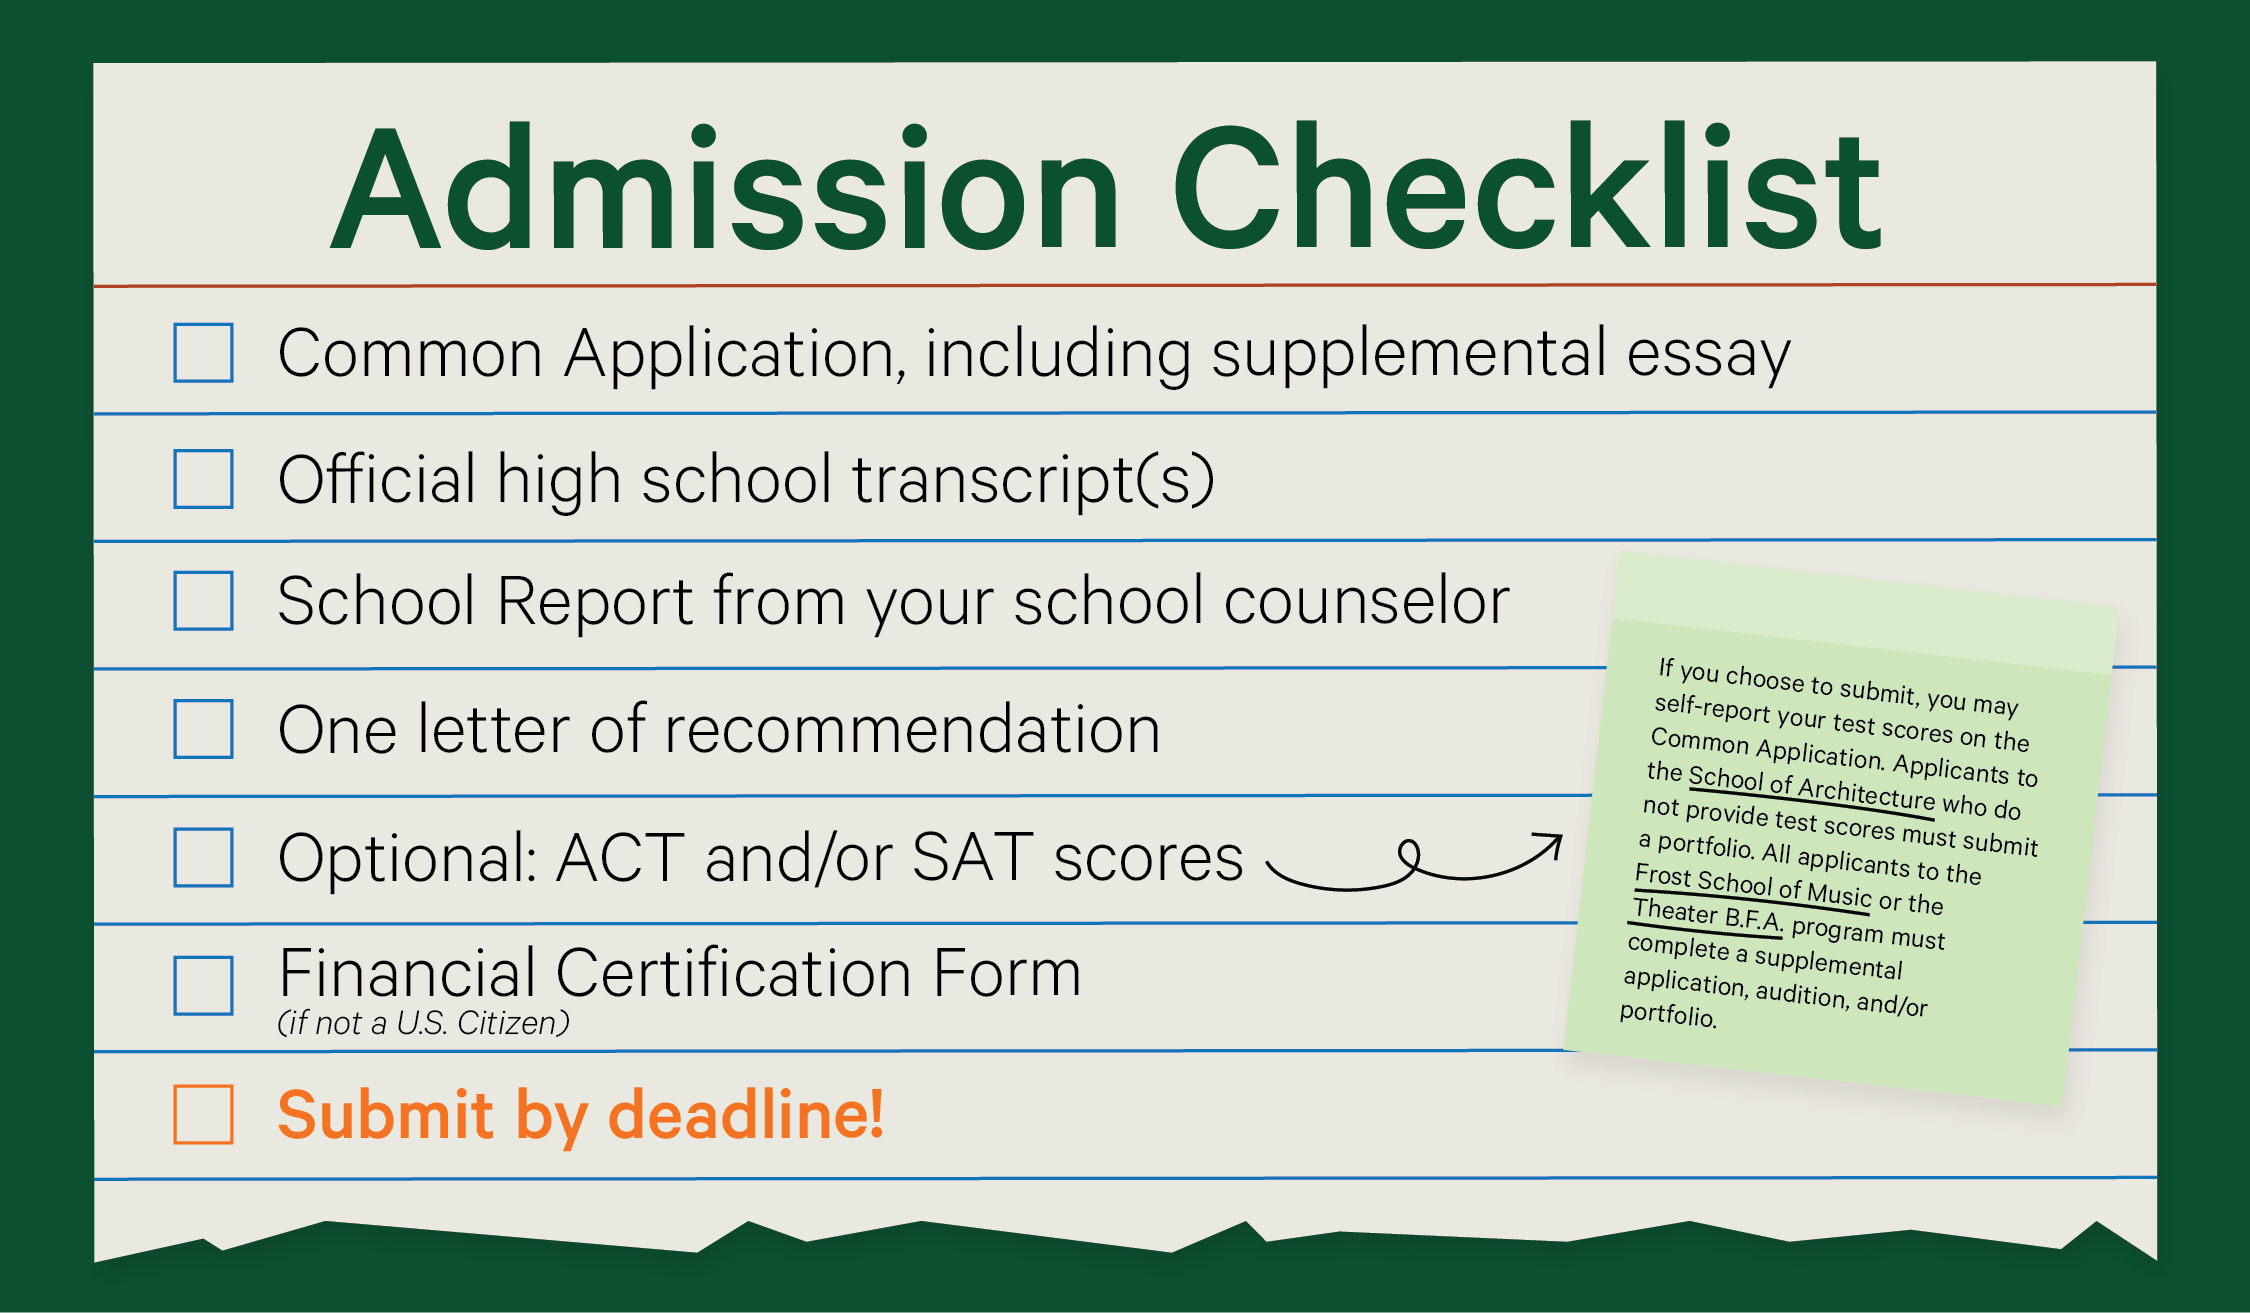 Admission checklist for first-year students.